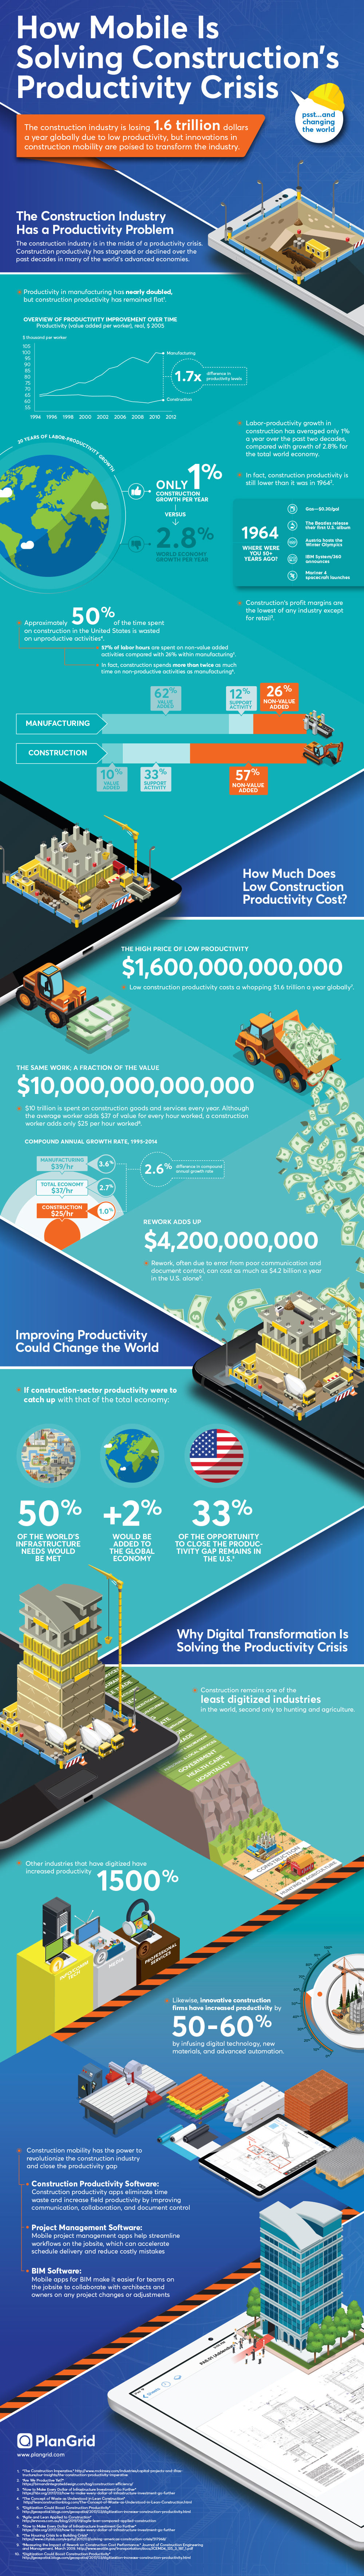 productivity in construction - infographic